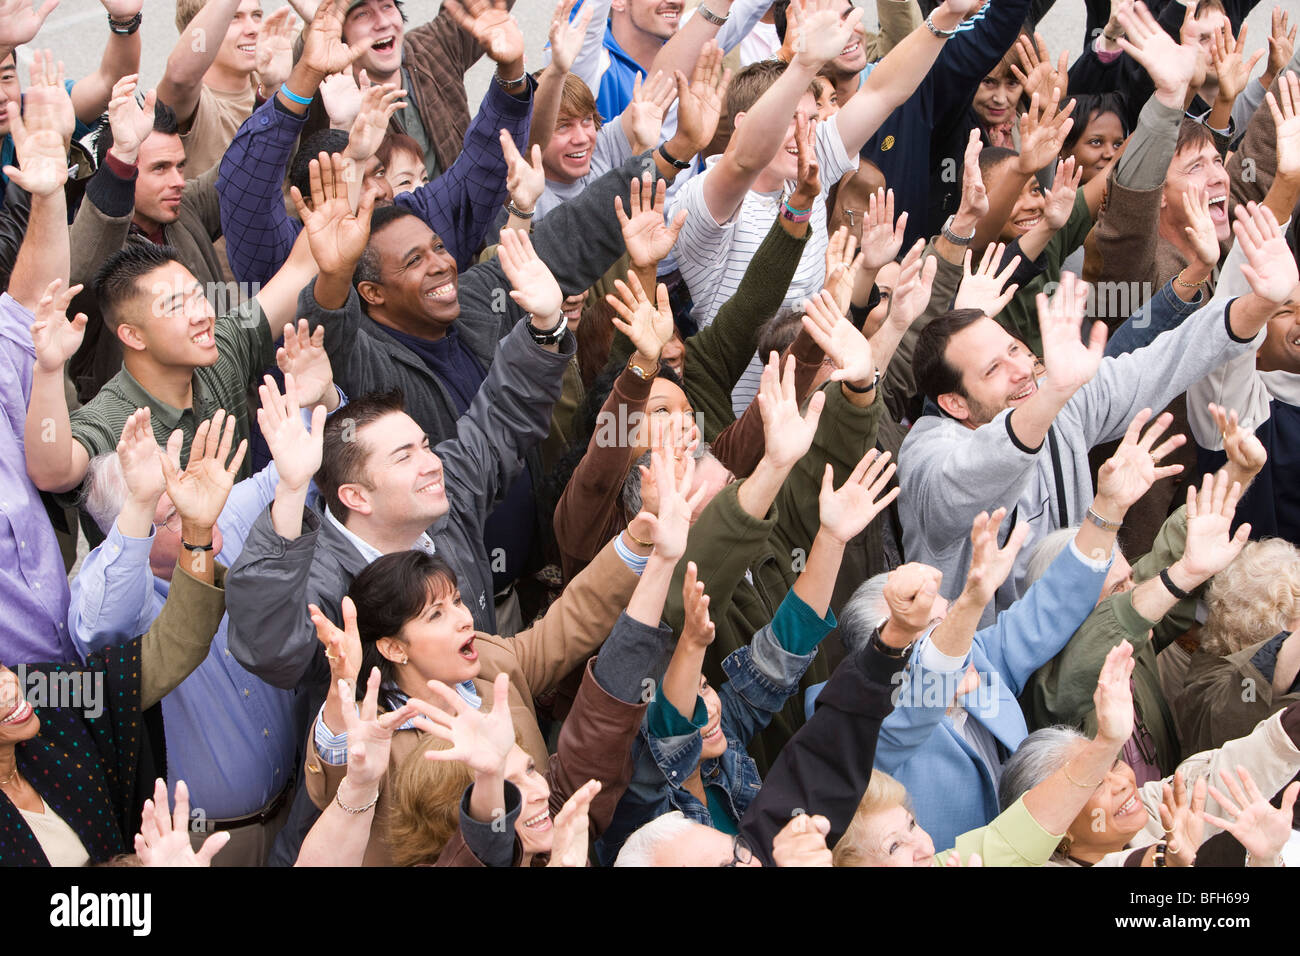 Crowd with arms raised Stock Photo